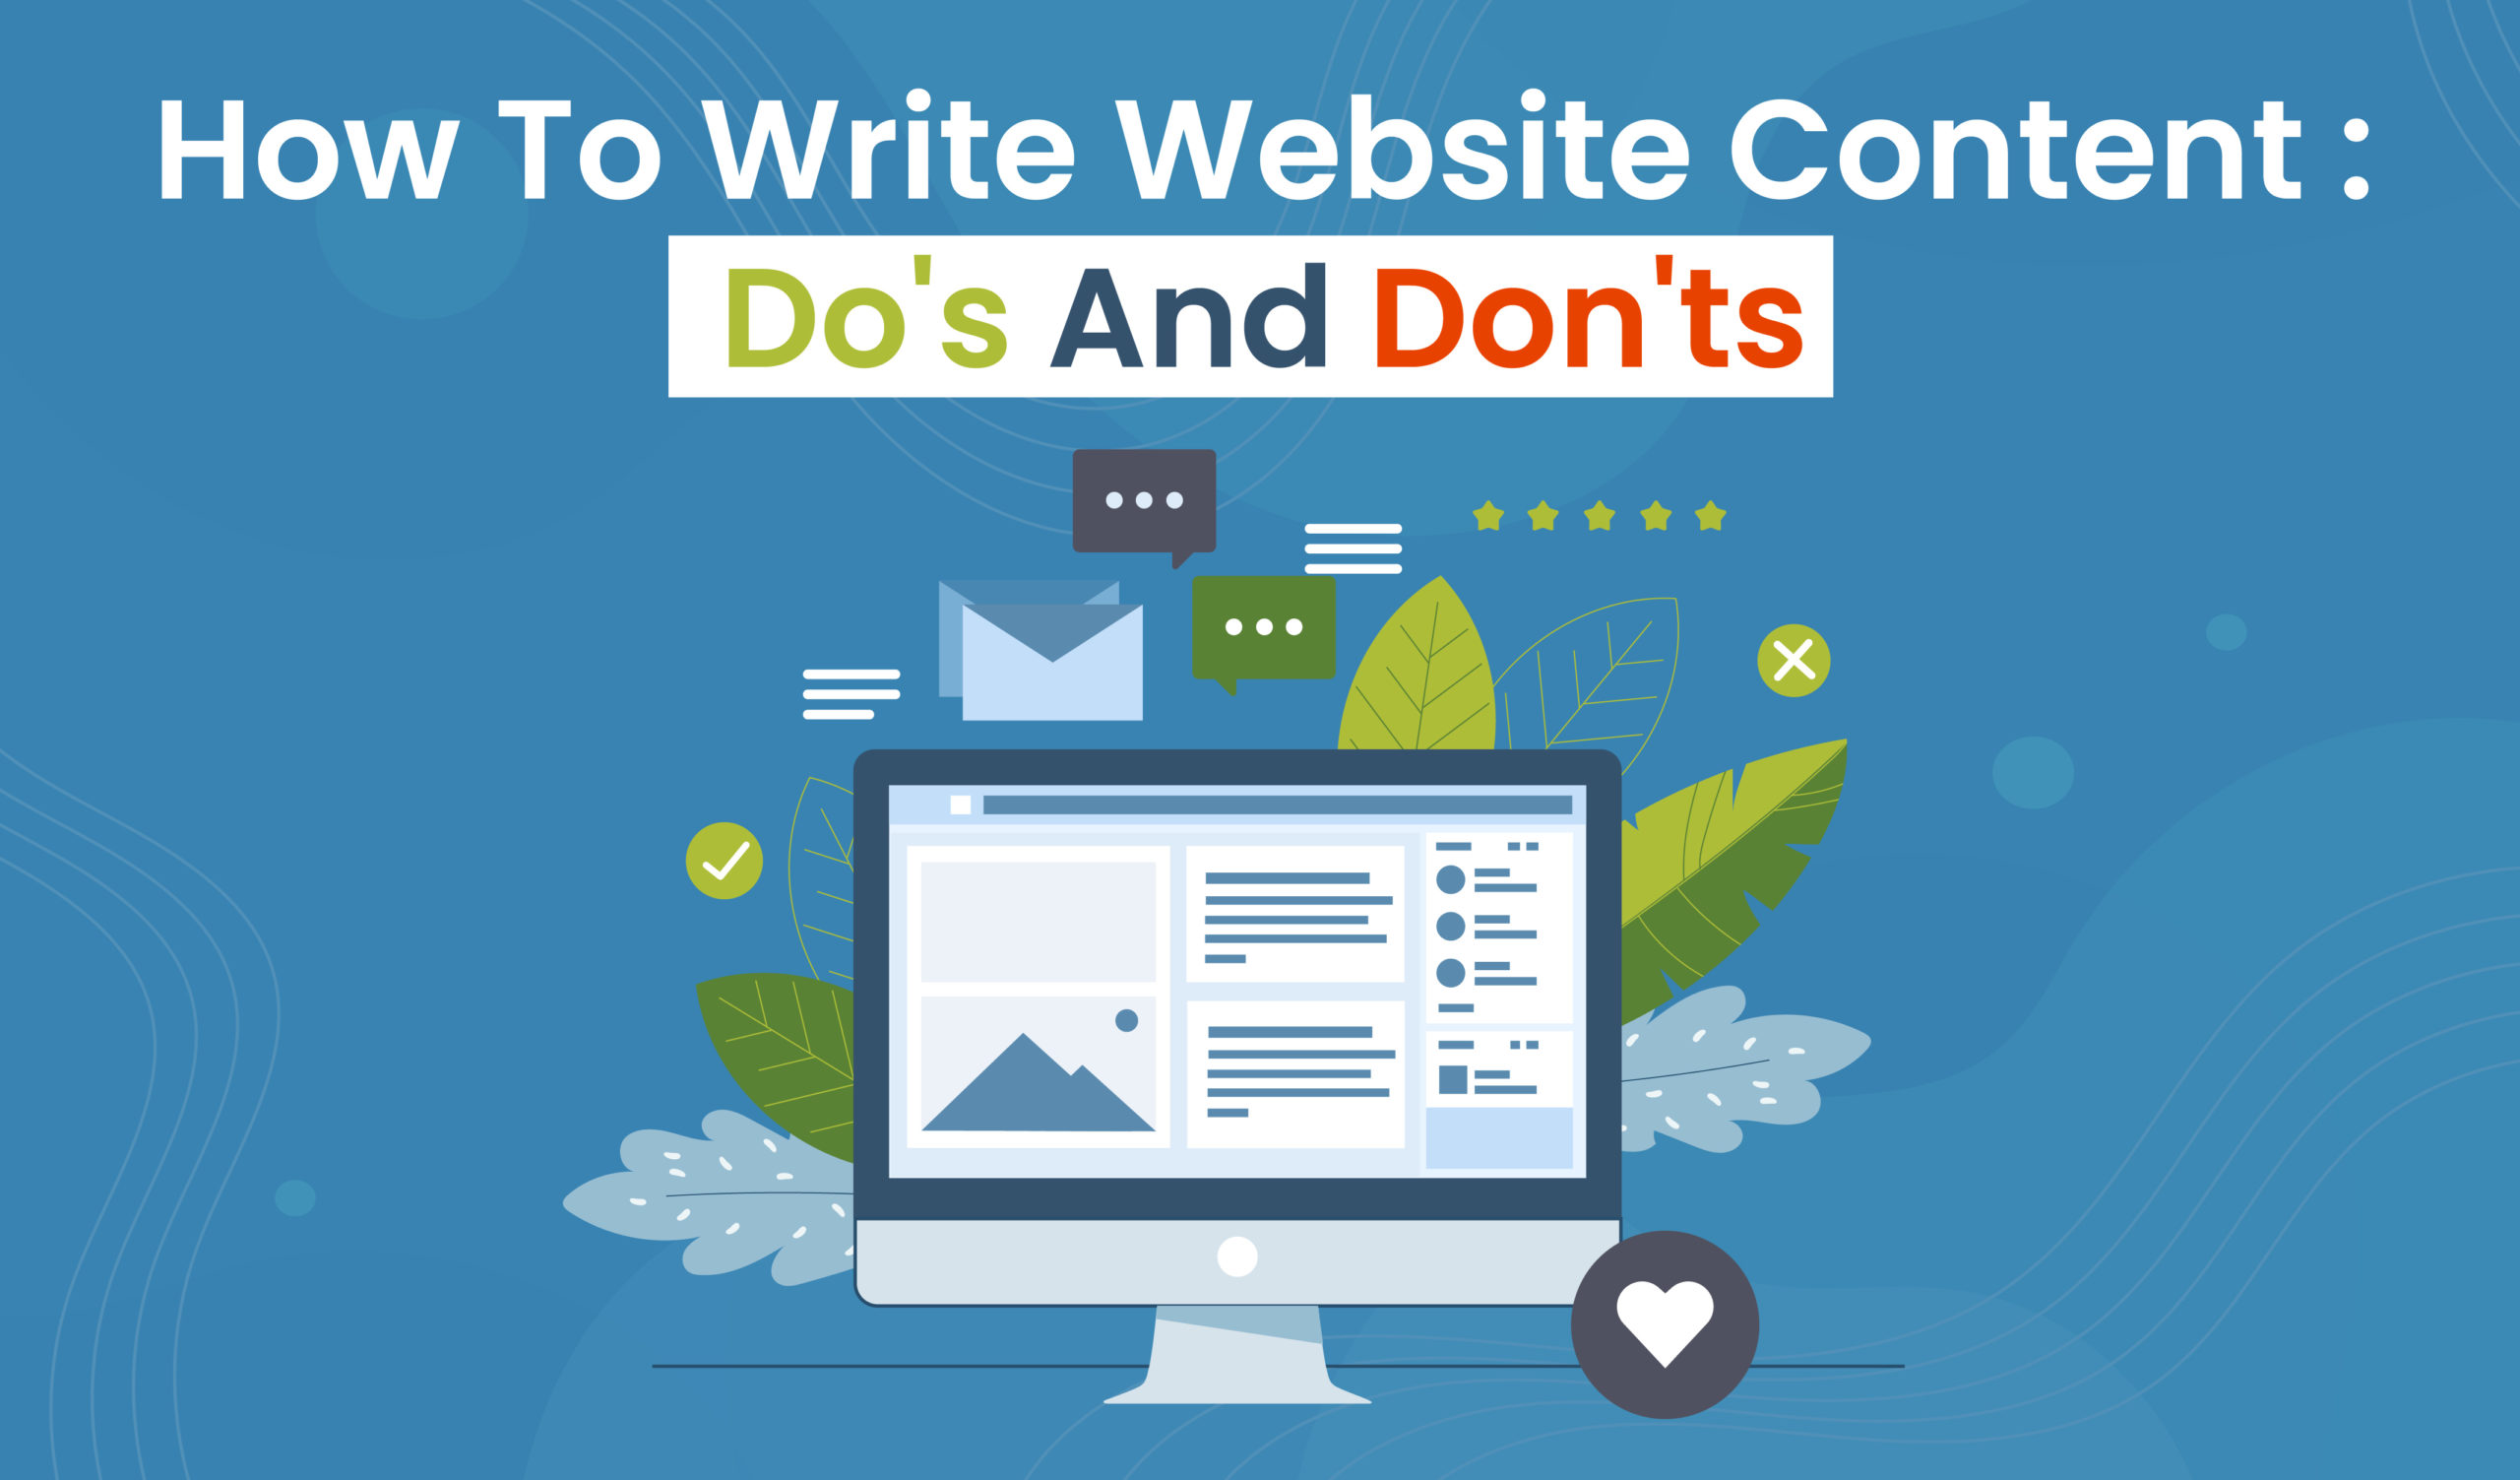 How to write website content: Do’s and Don’ts